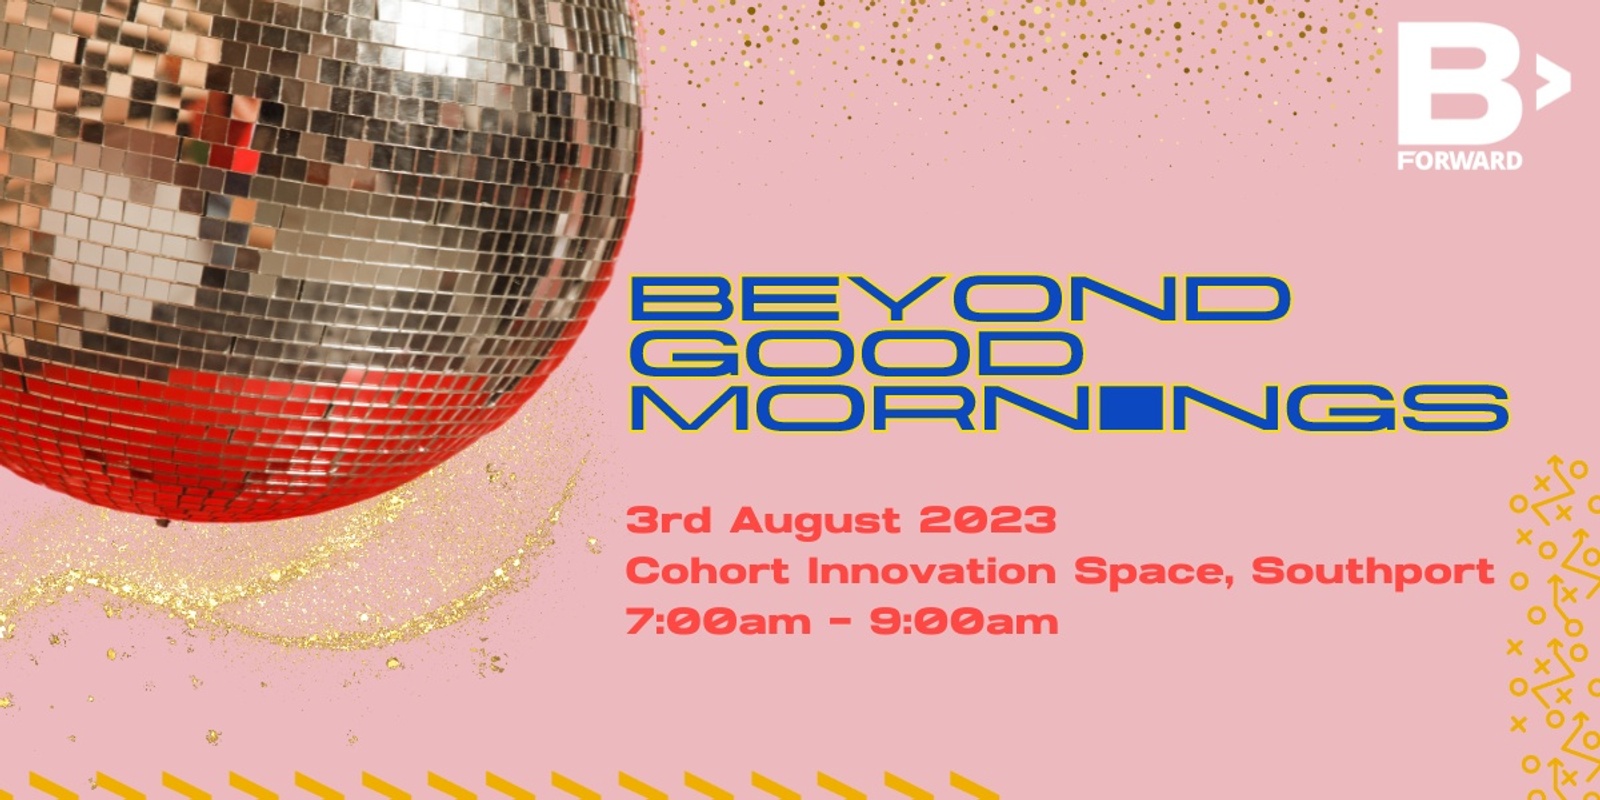 Banner image for Beyond Good Mornings #QSOCENT